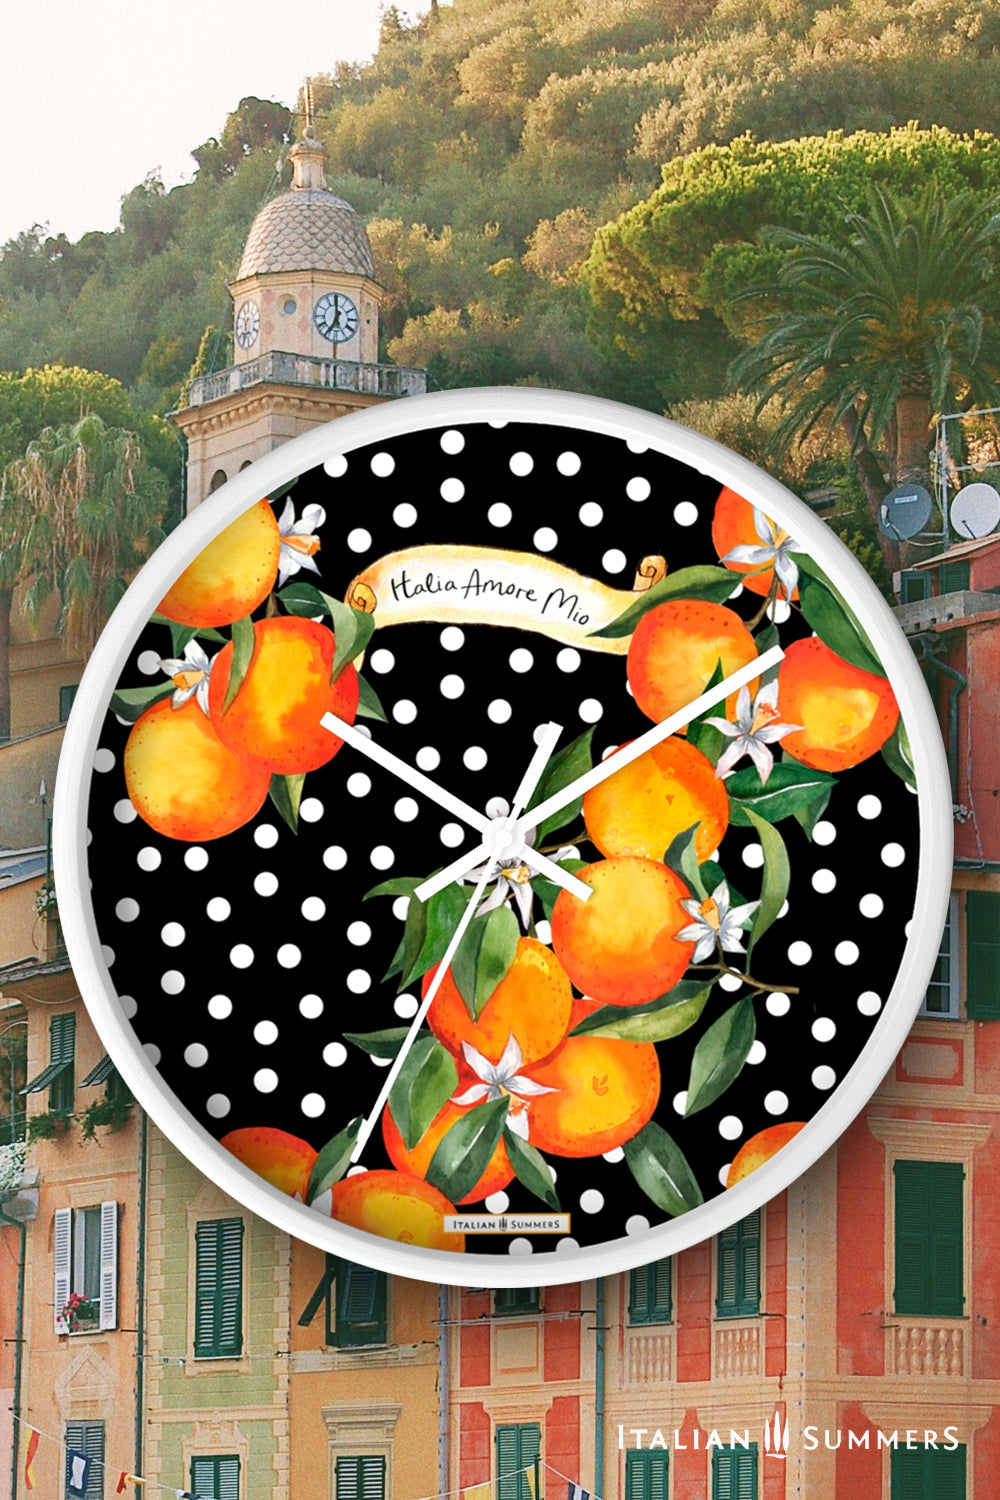 Wall clock  SICILIAN GARDEN  bursts with color, from the happy white polka dots to the lively orange blossoms. The timeless phrase 'Italia Amore Mio' adds a meaningful touch of love. Designed and sold by Italian Summers